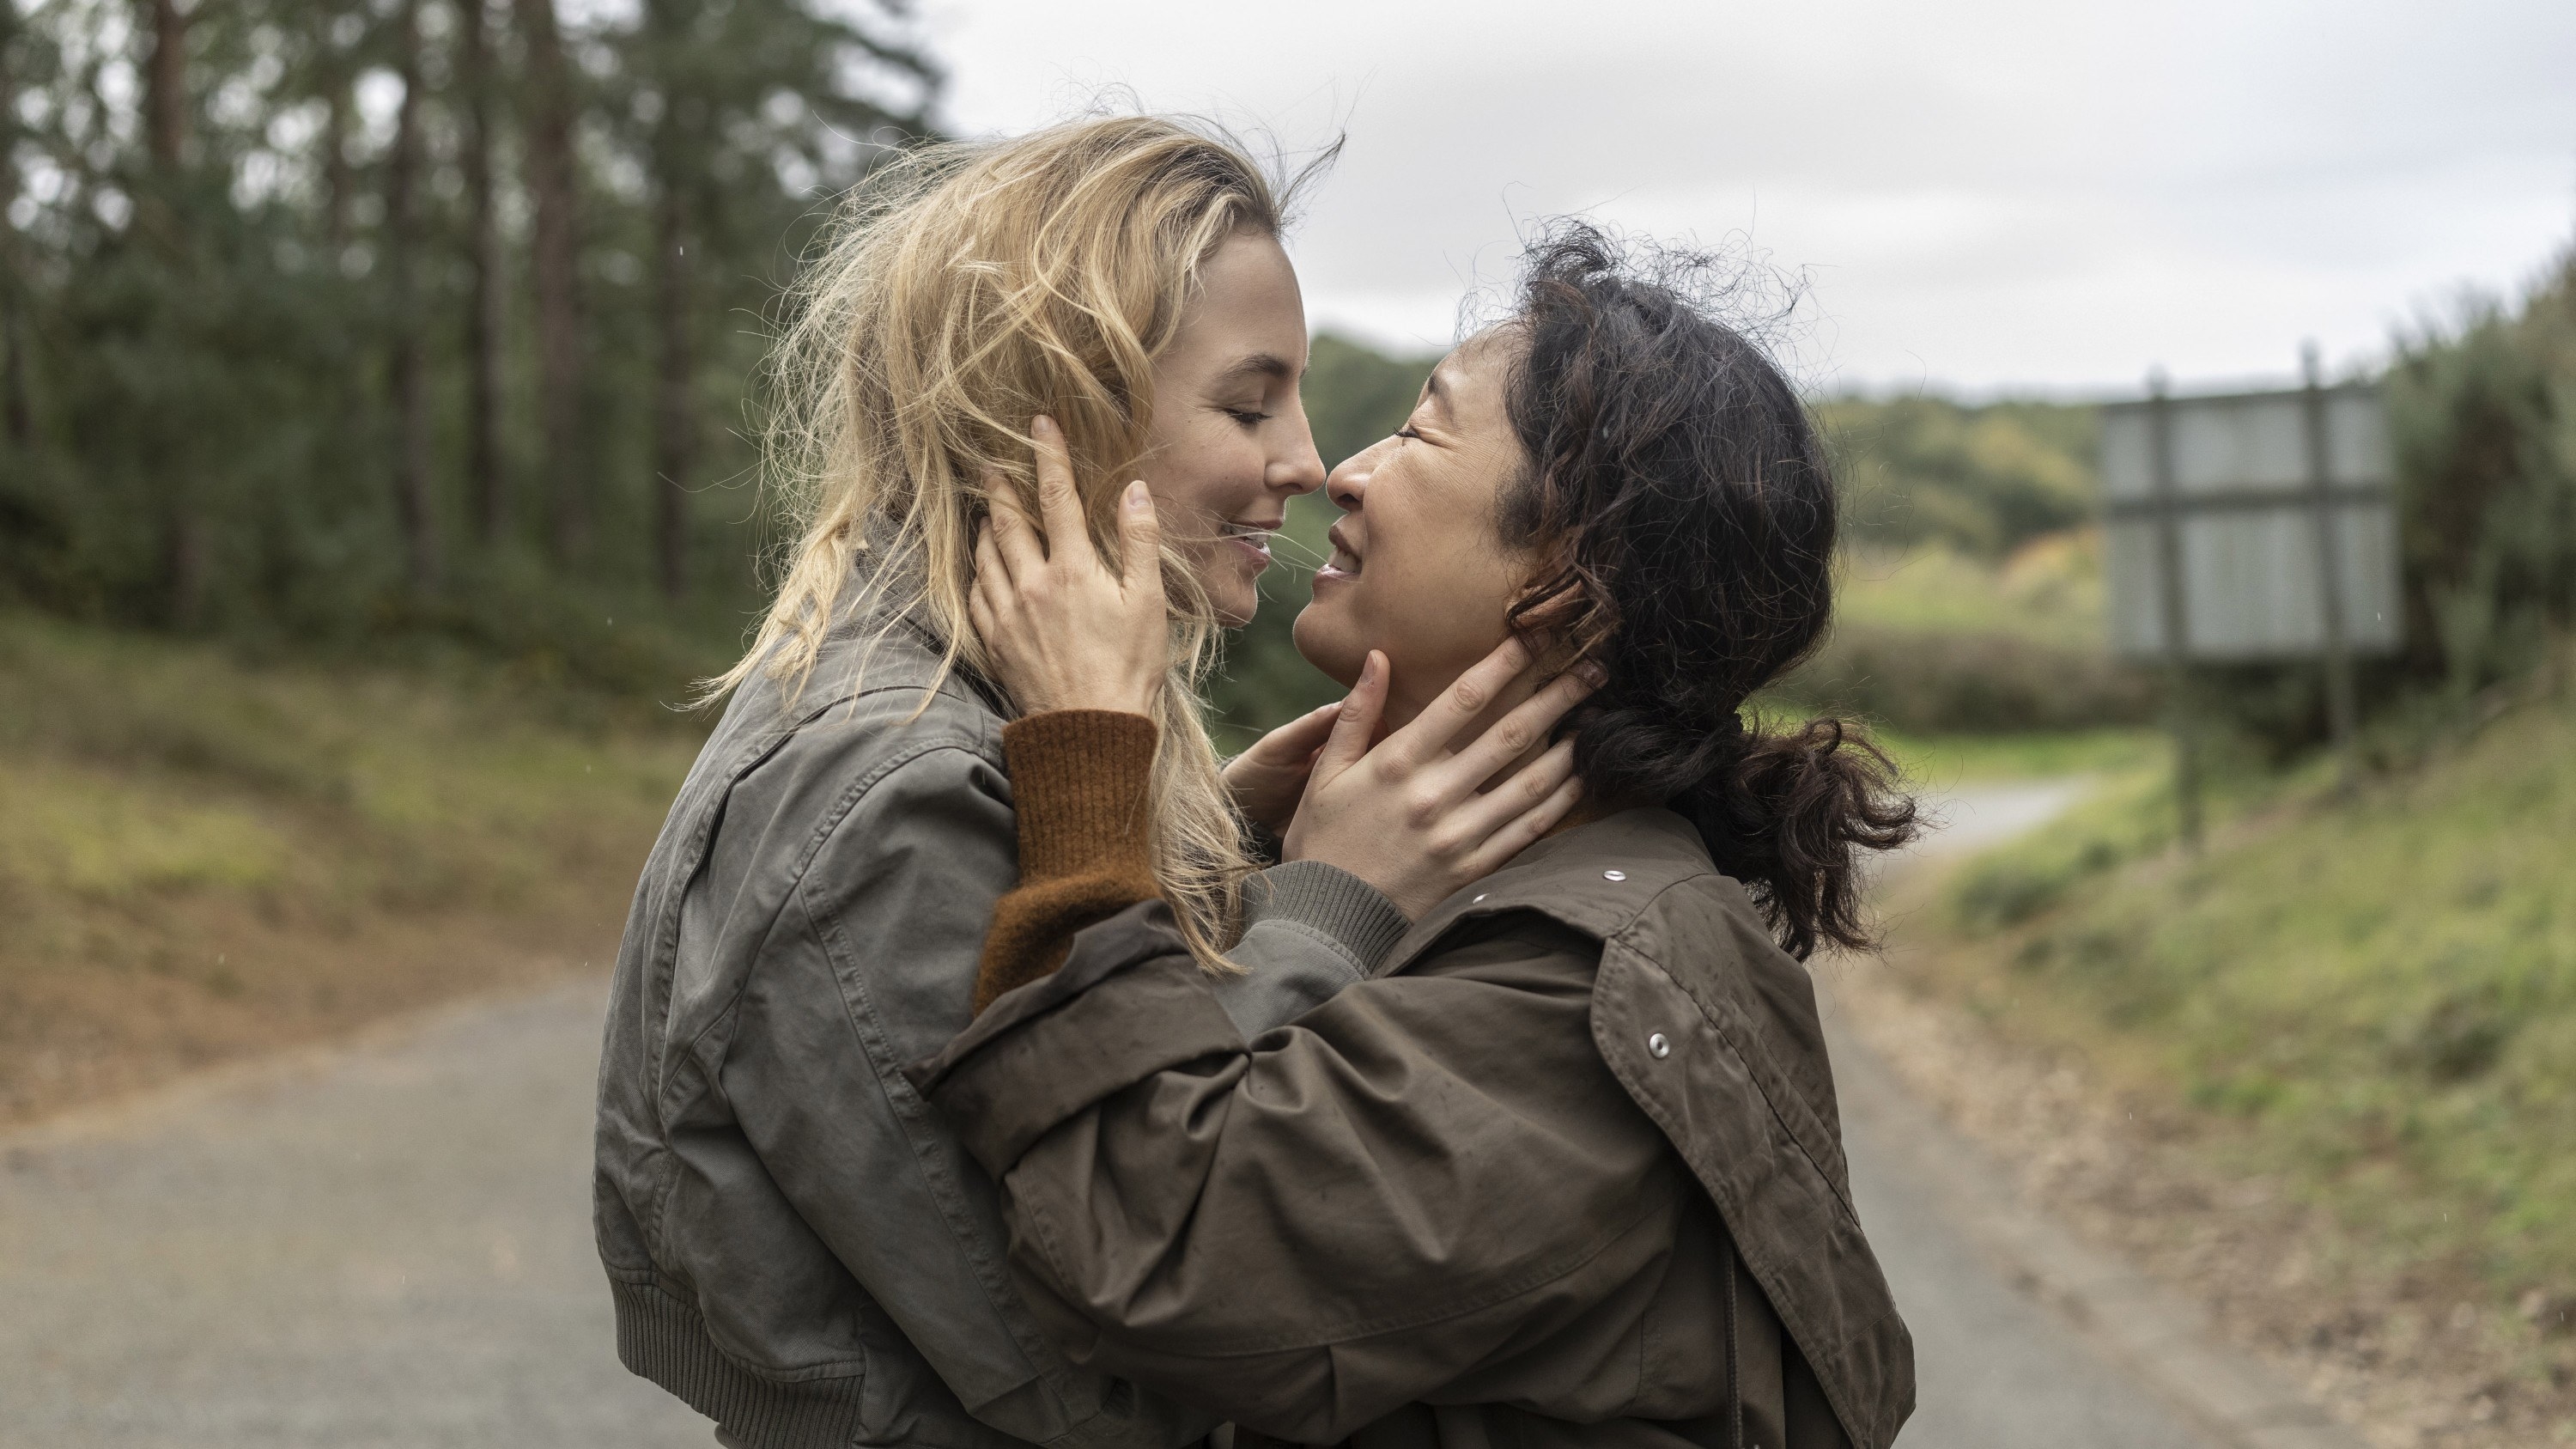 Villanelle and eve kiss